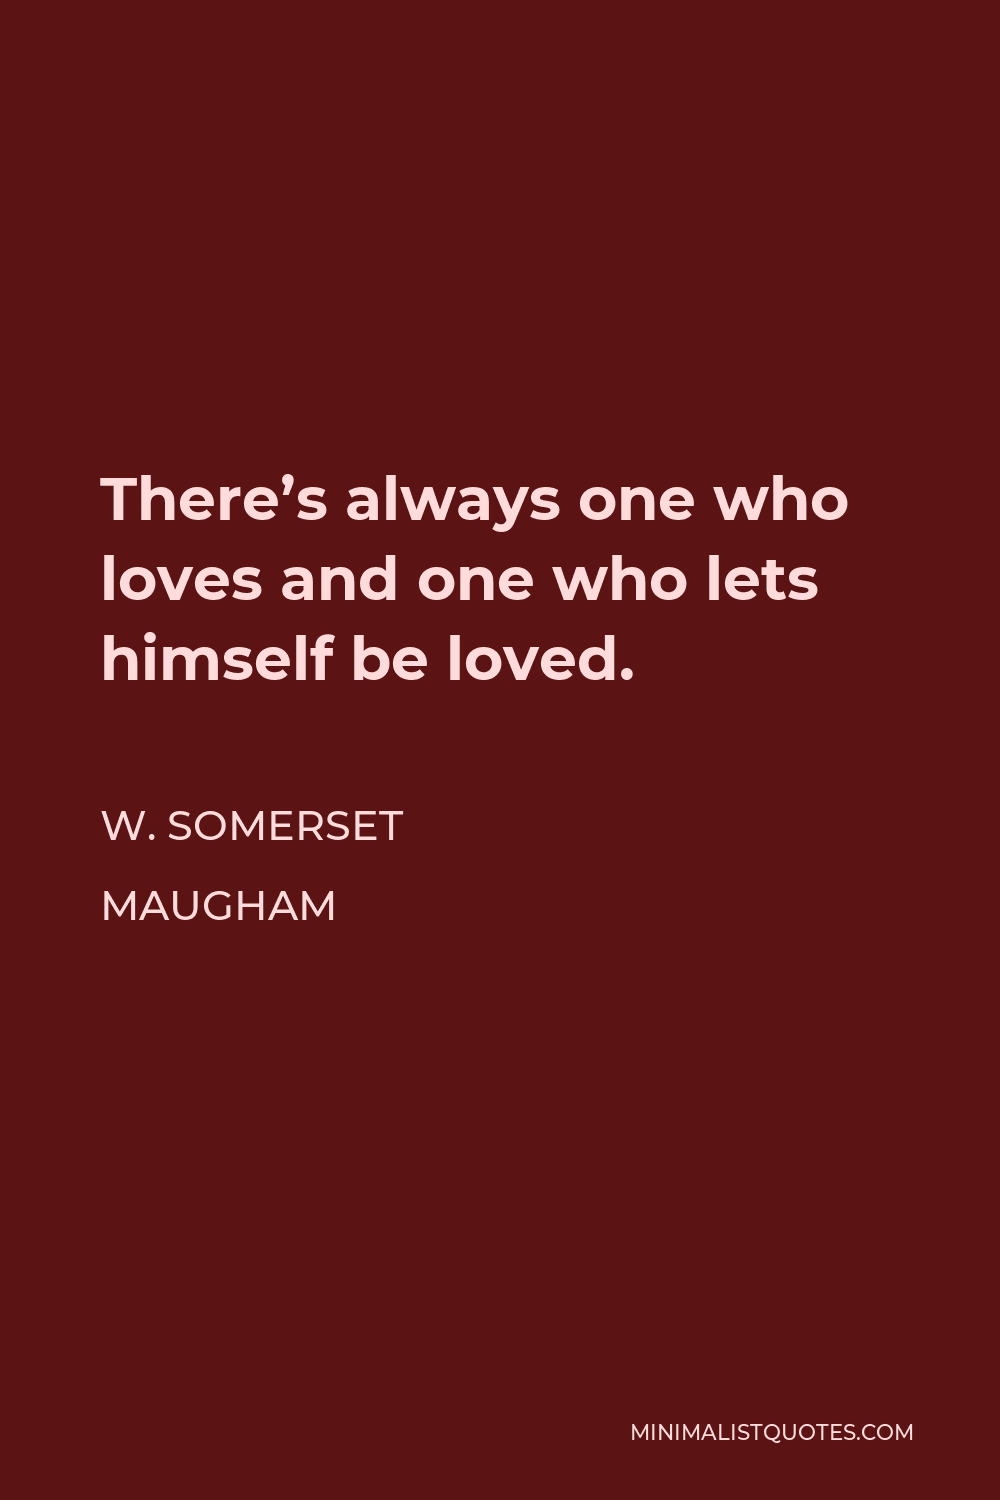 W. Somerset Maugham Quote - There’s always one who loves and one who lets himself be loved.